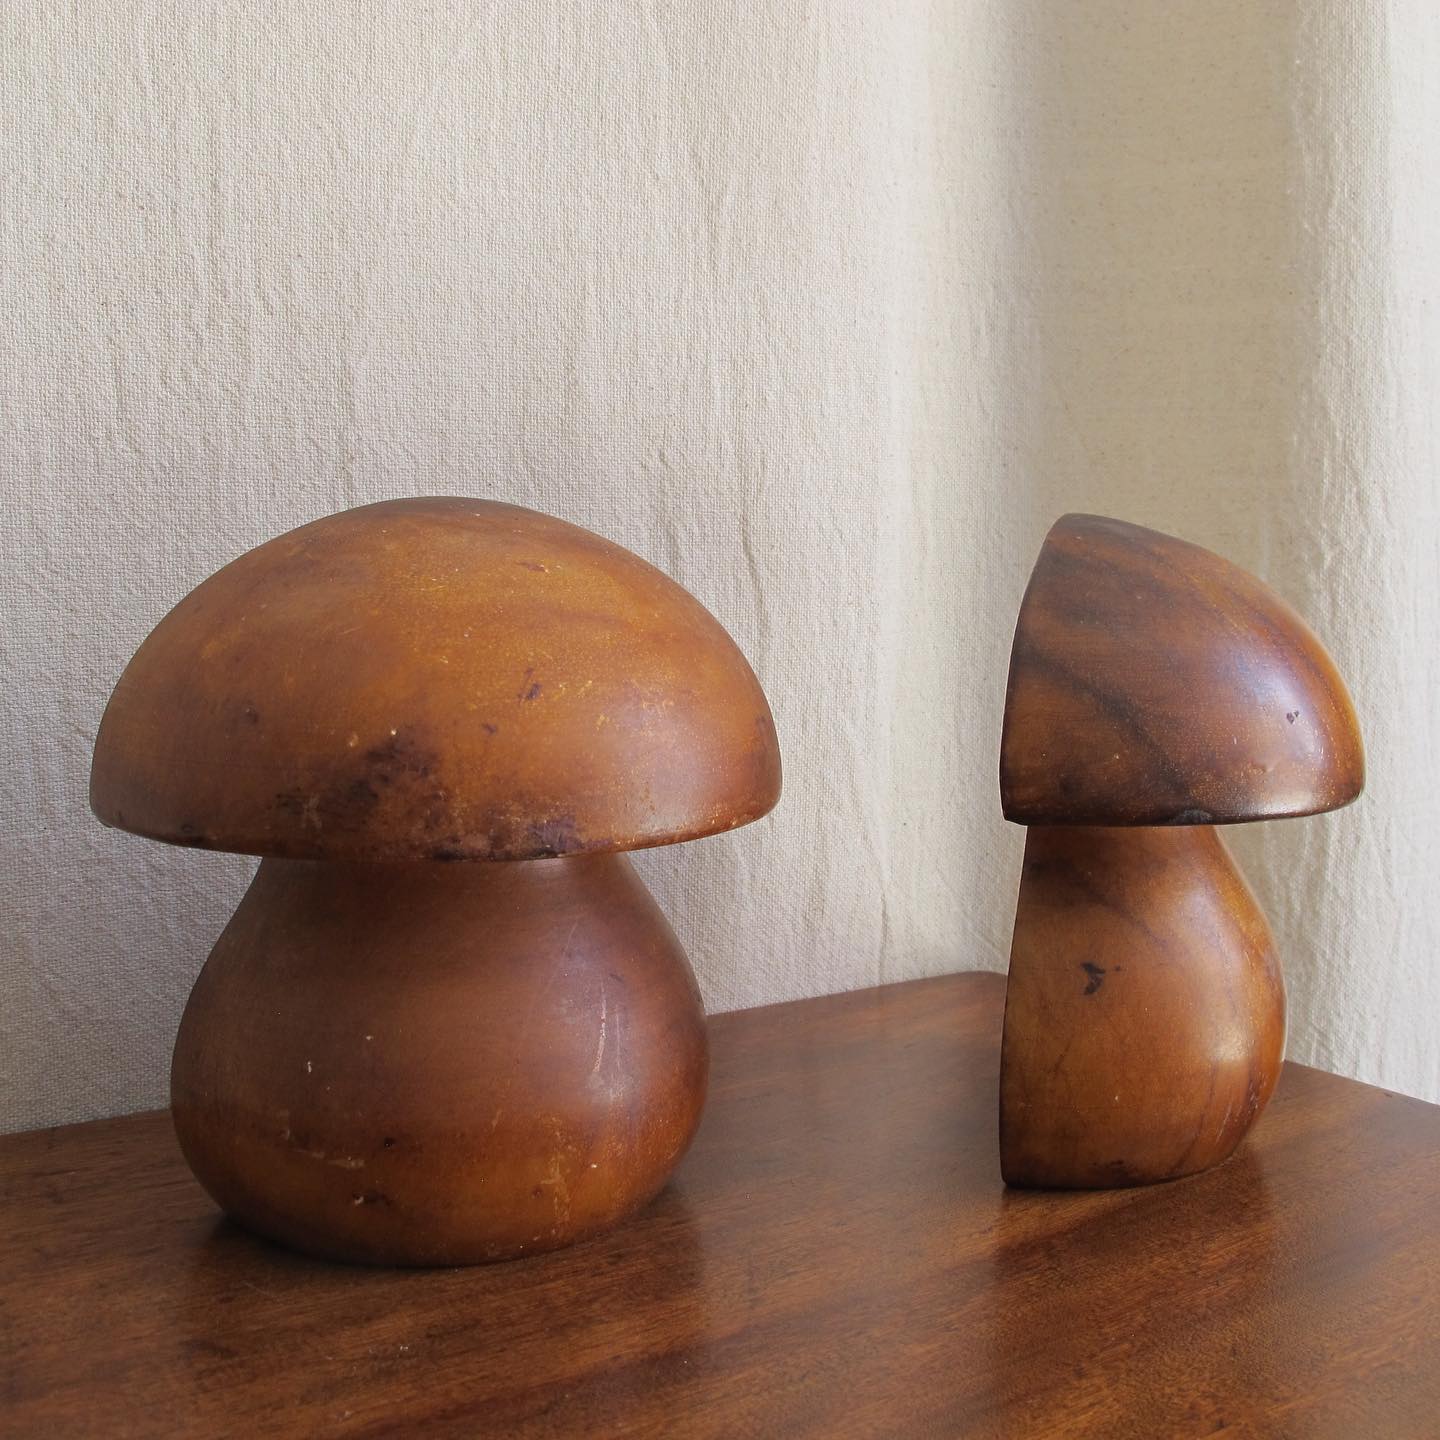 Large mushroom or toadstool form Italian alabaster bookends, c. 1950s 1960s